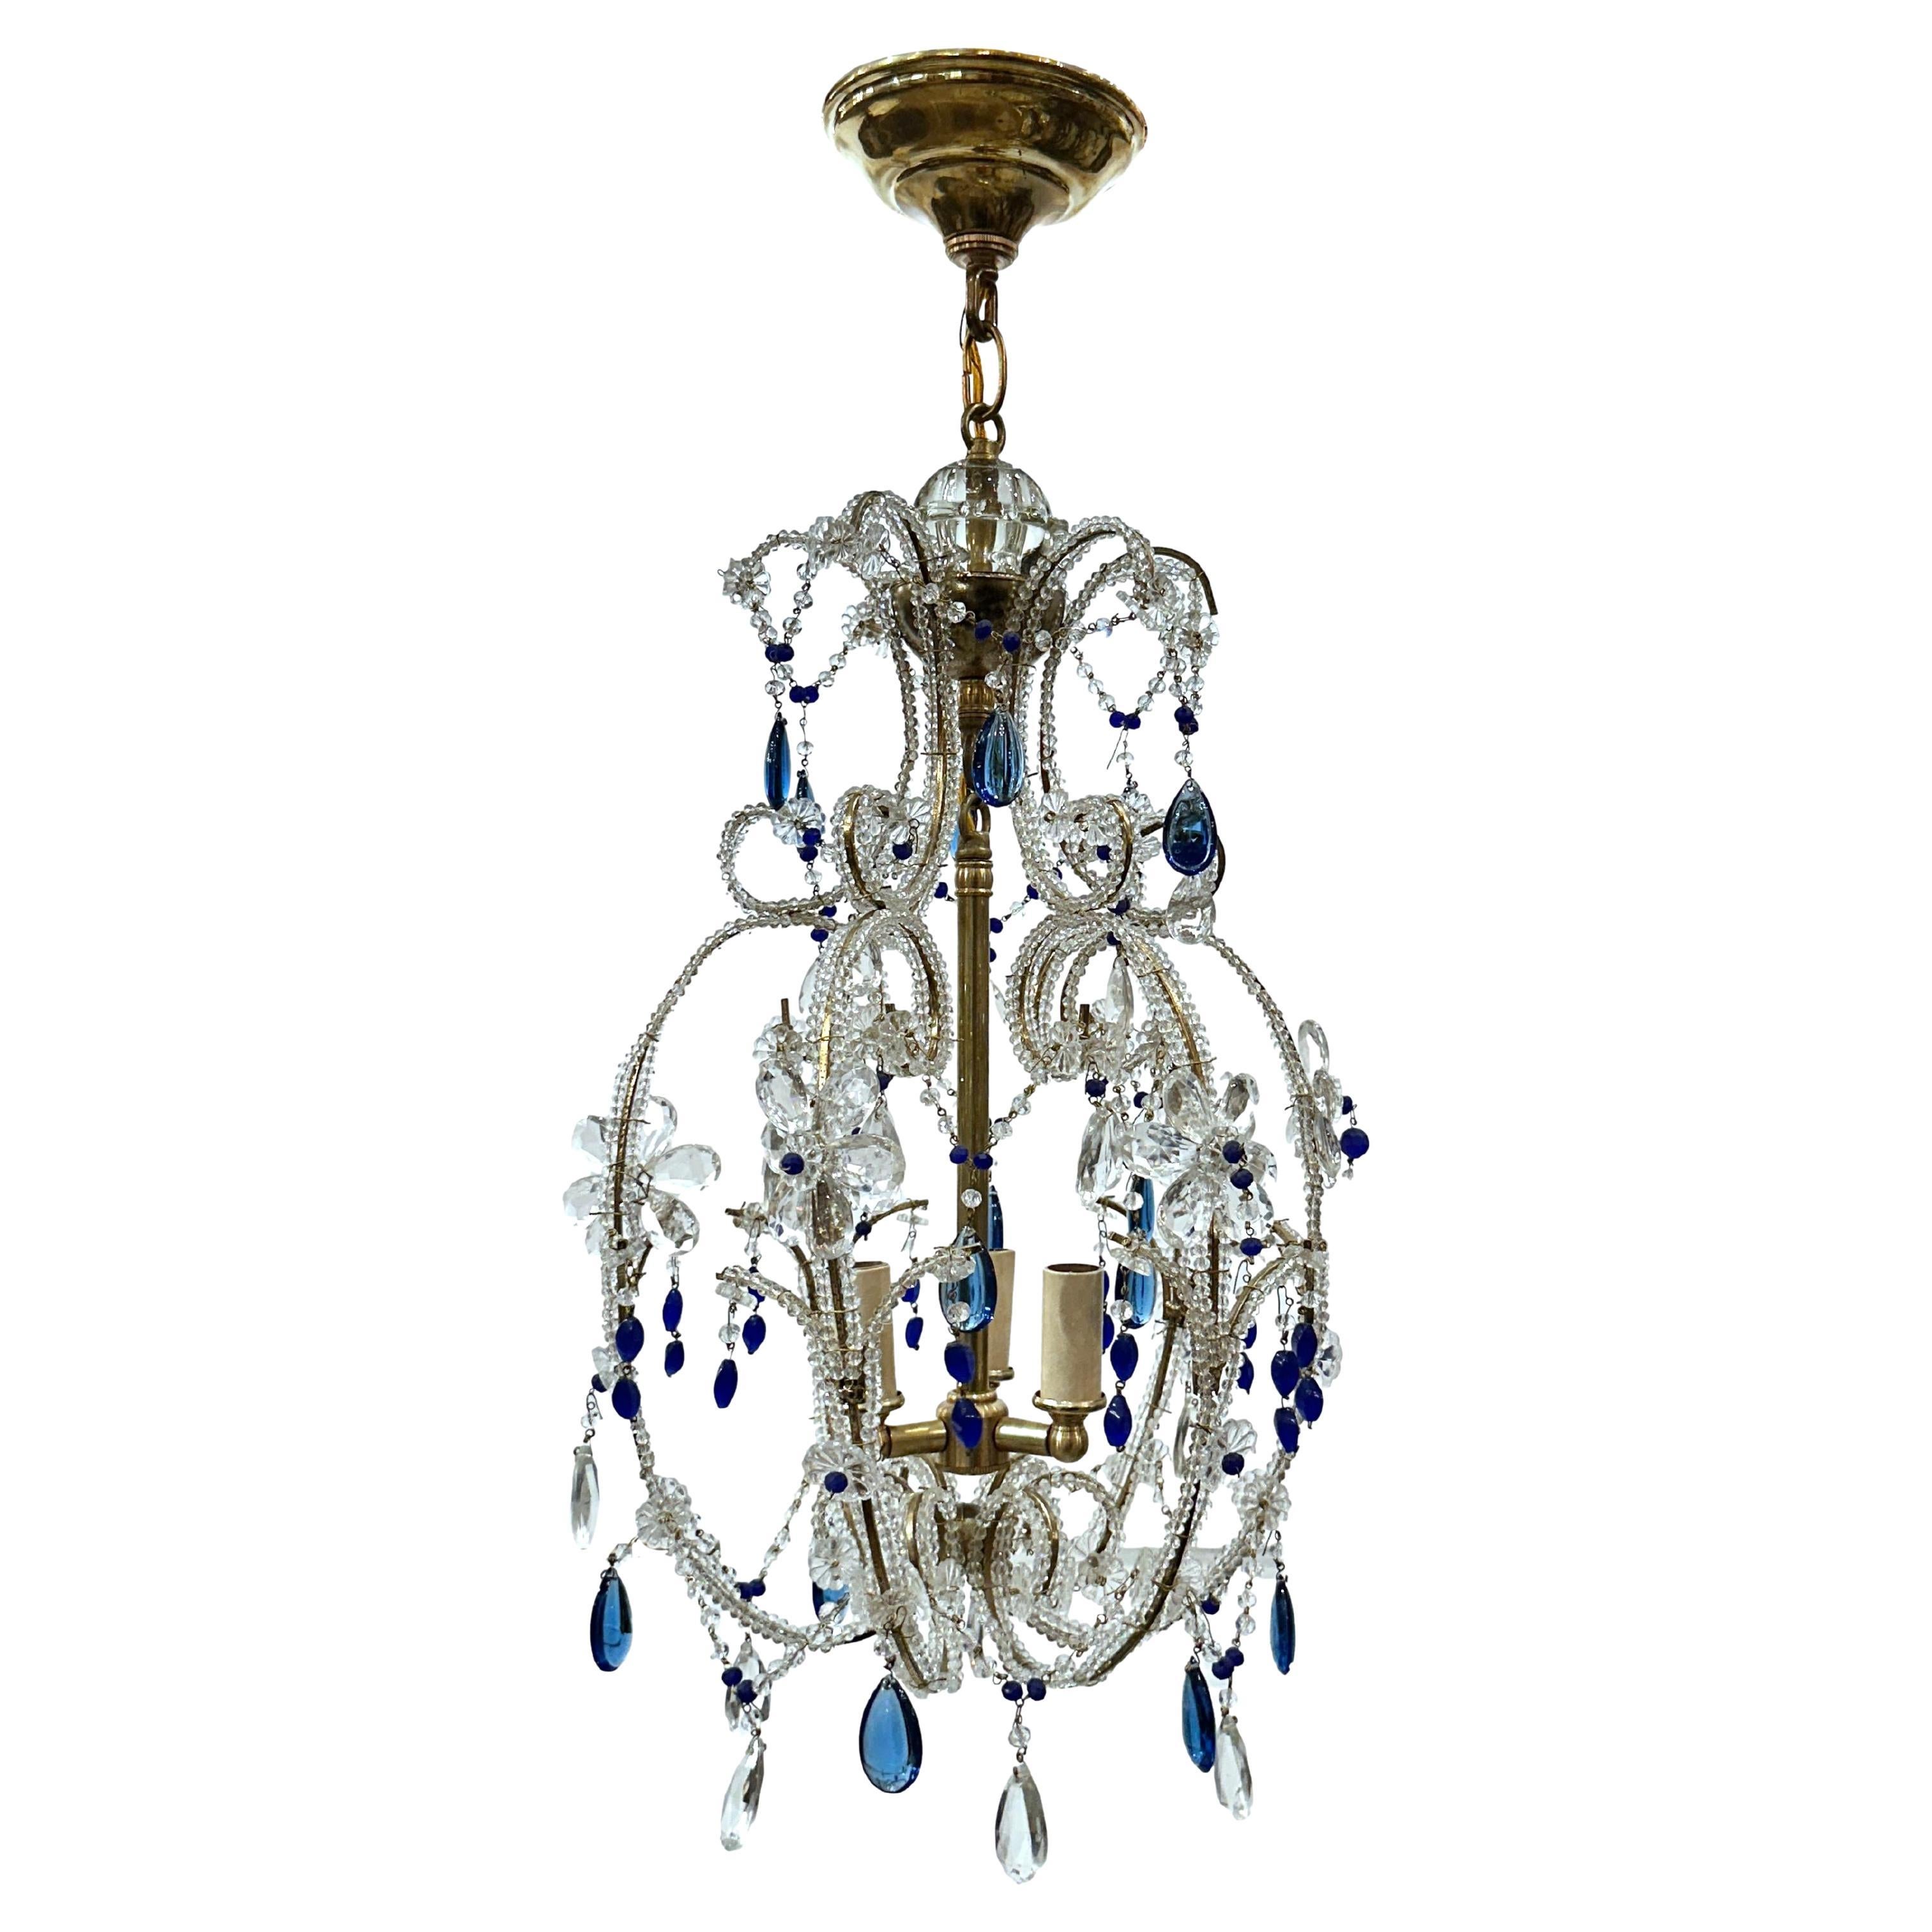 A circa 1950’s beaded gilt metal chandelier with blue glass drops and 3 interior lights.

Measurements:
Drop: 26″
Diameter: 12″